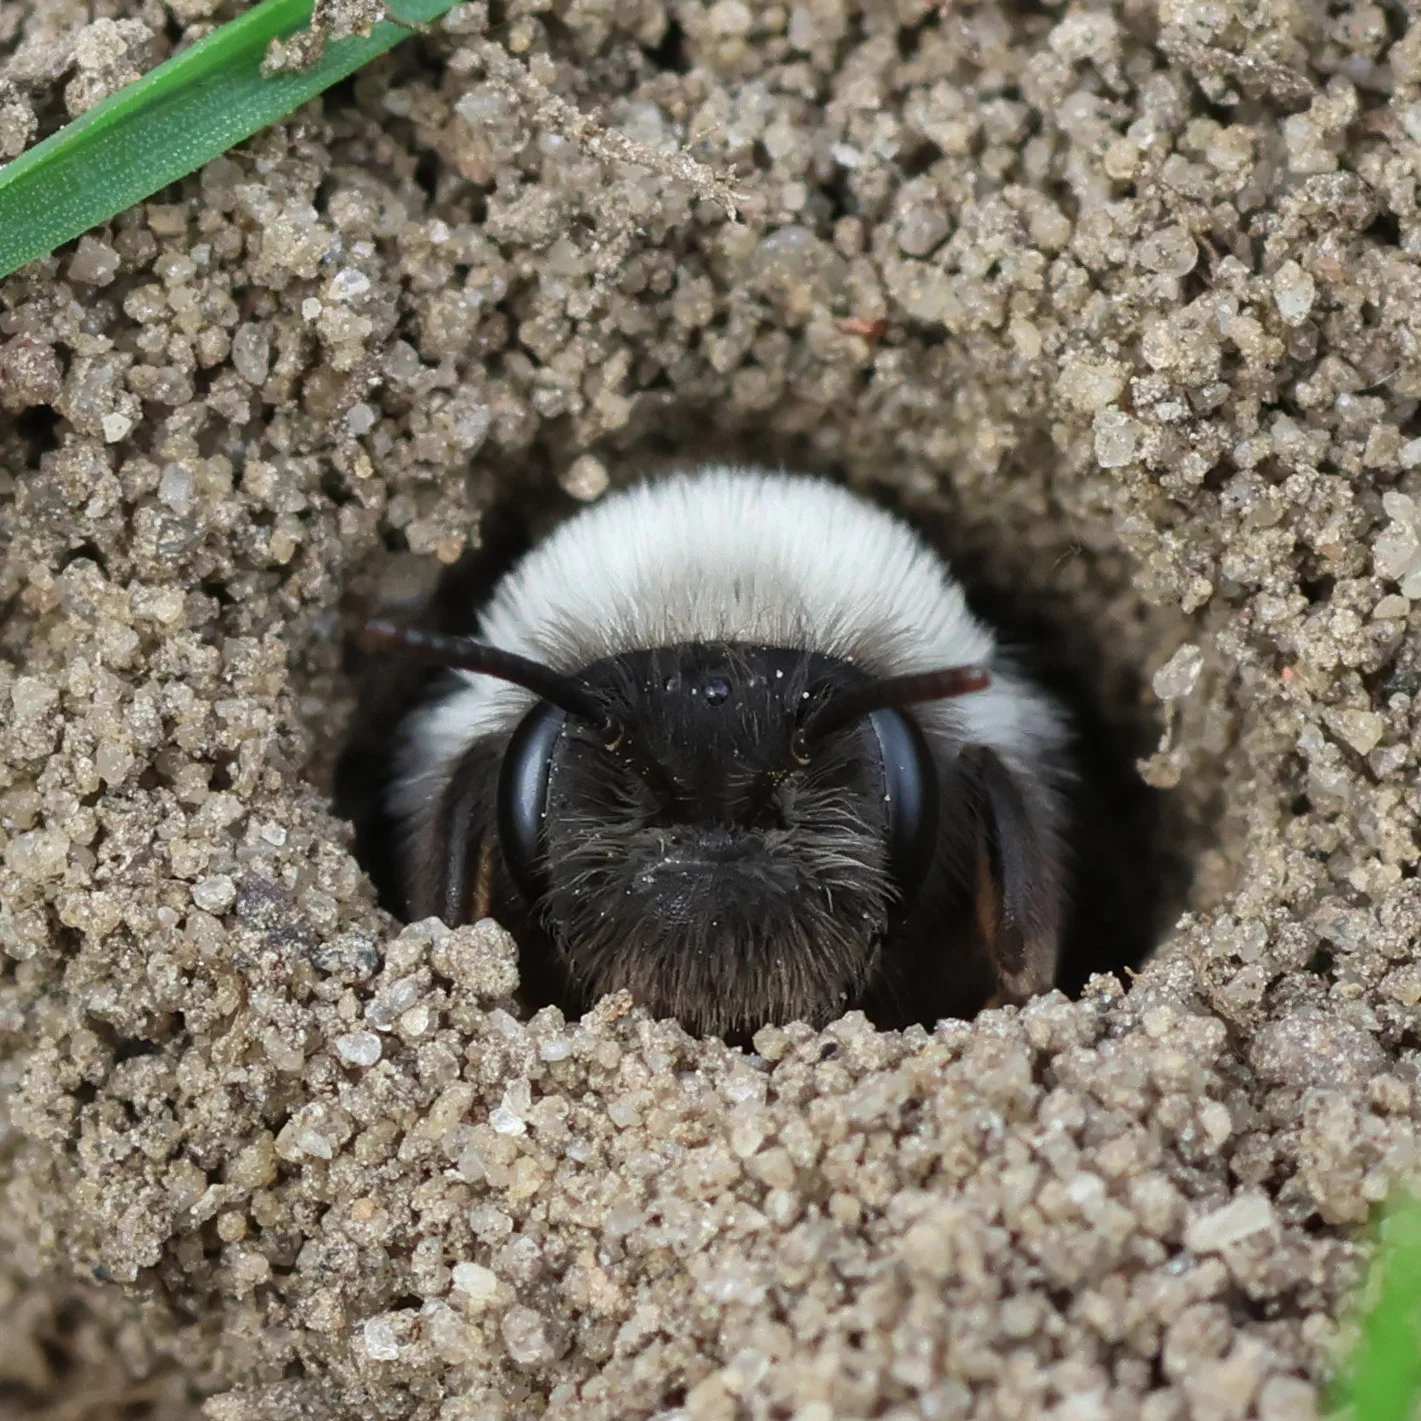 Macro photograph of a mining bee looking out the opening of a burrow in the dirt